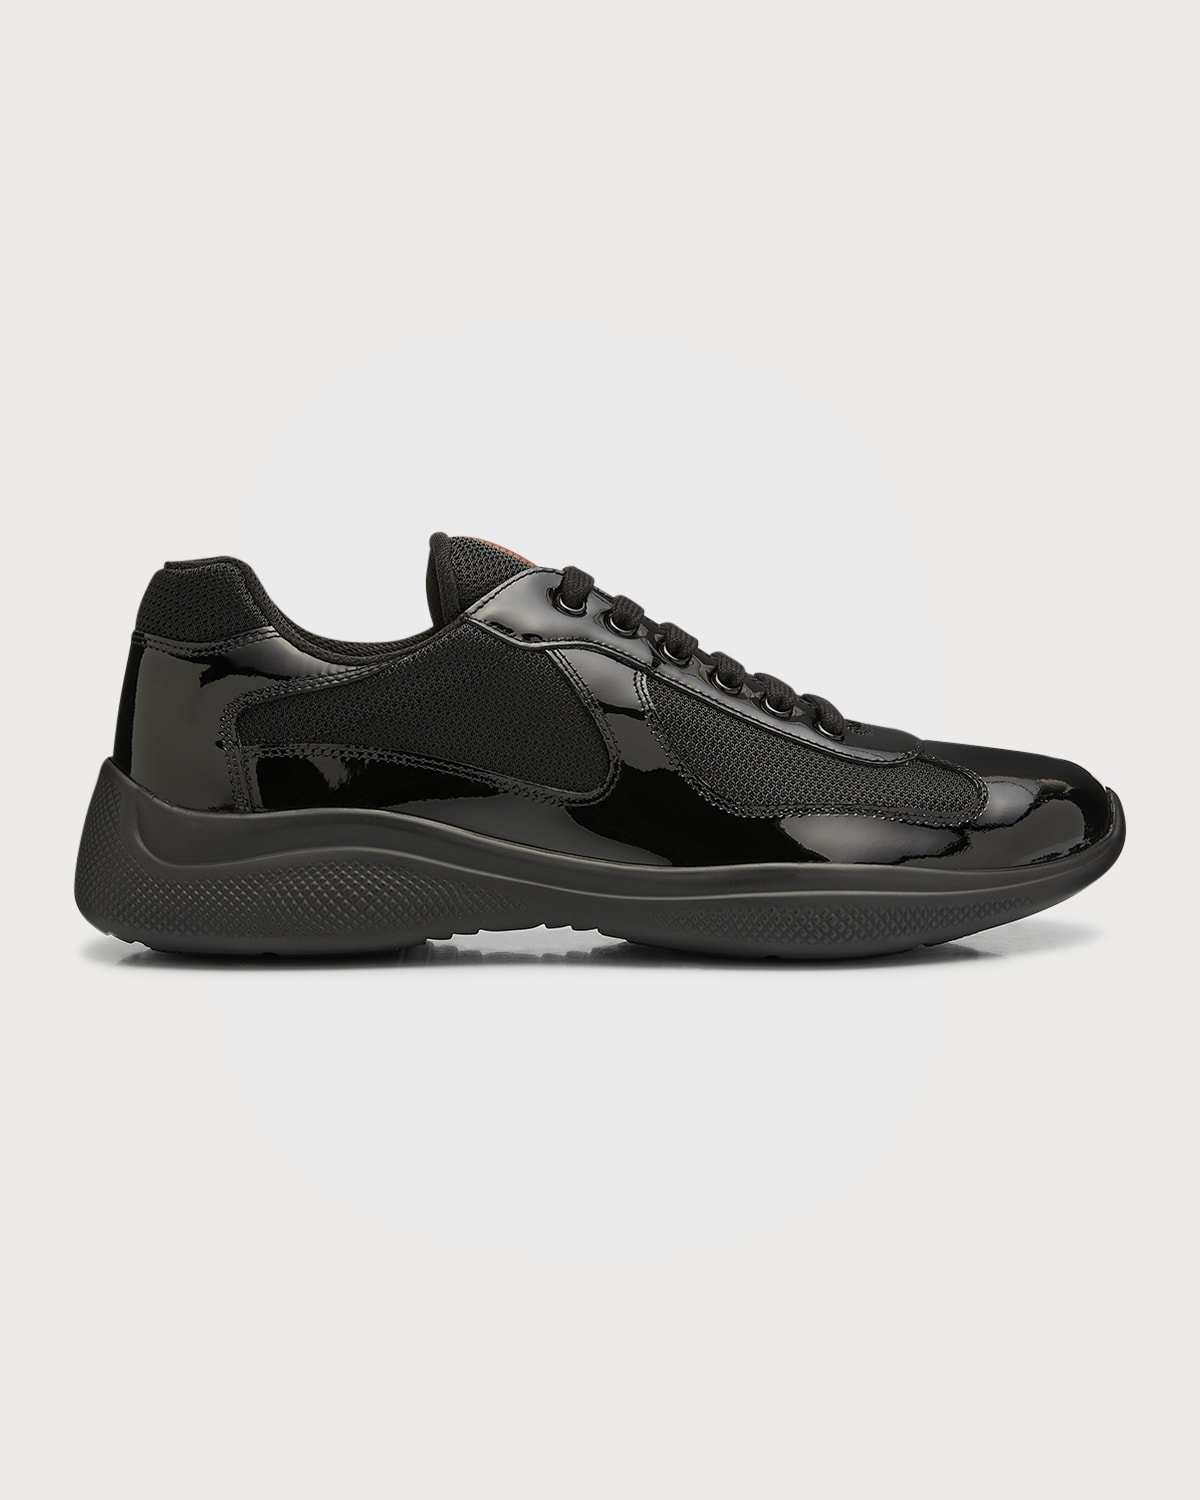 Prada Men's America's Cup Patent Leather Patchwork Sneakers